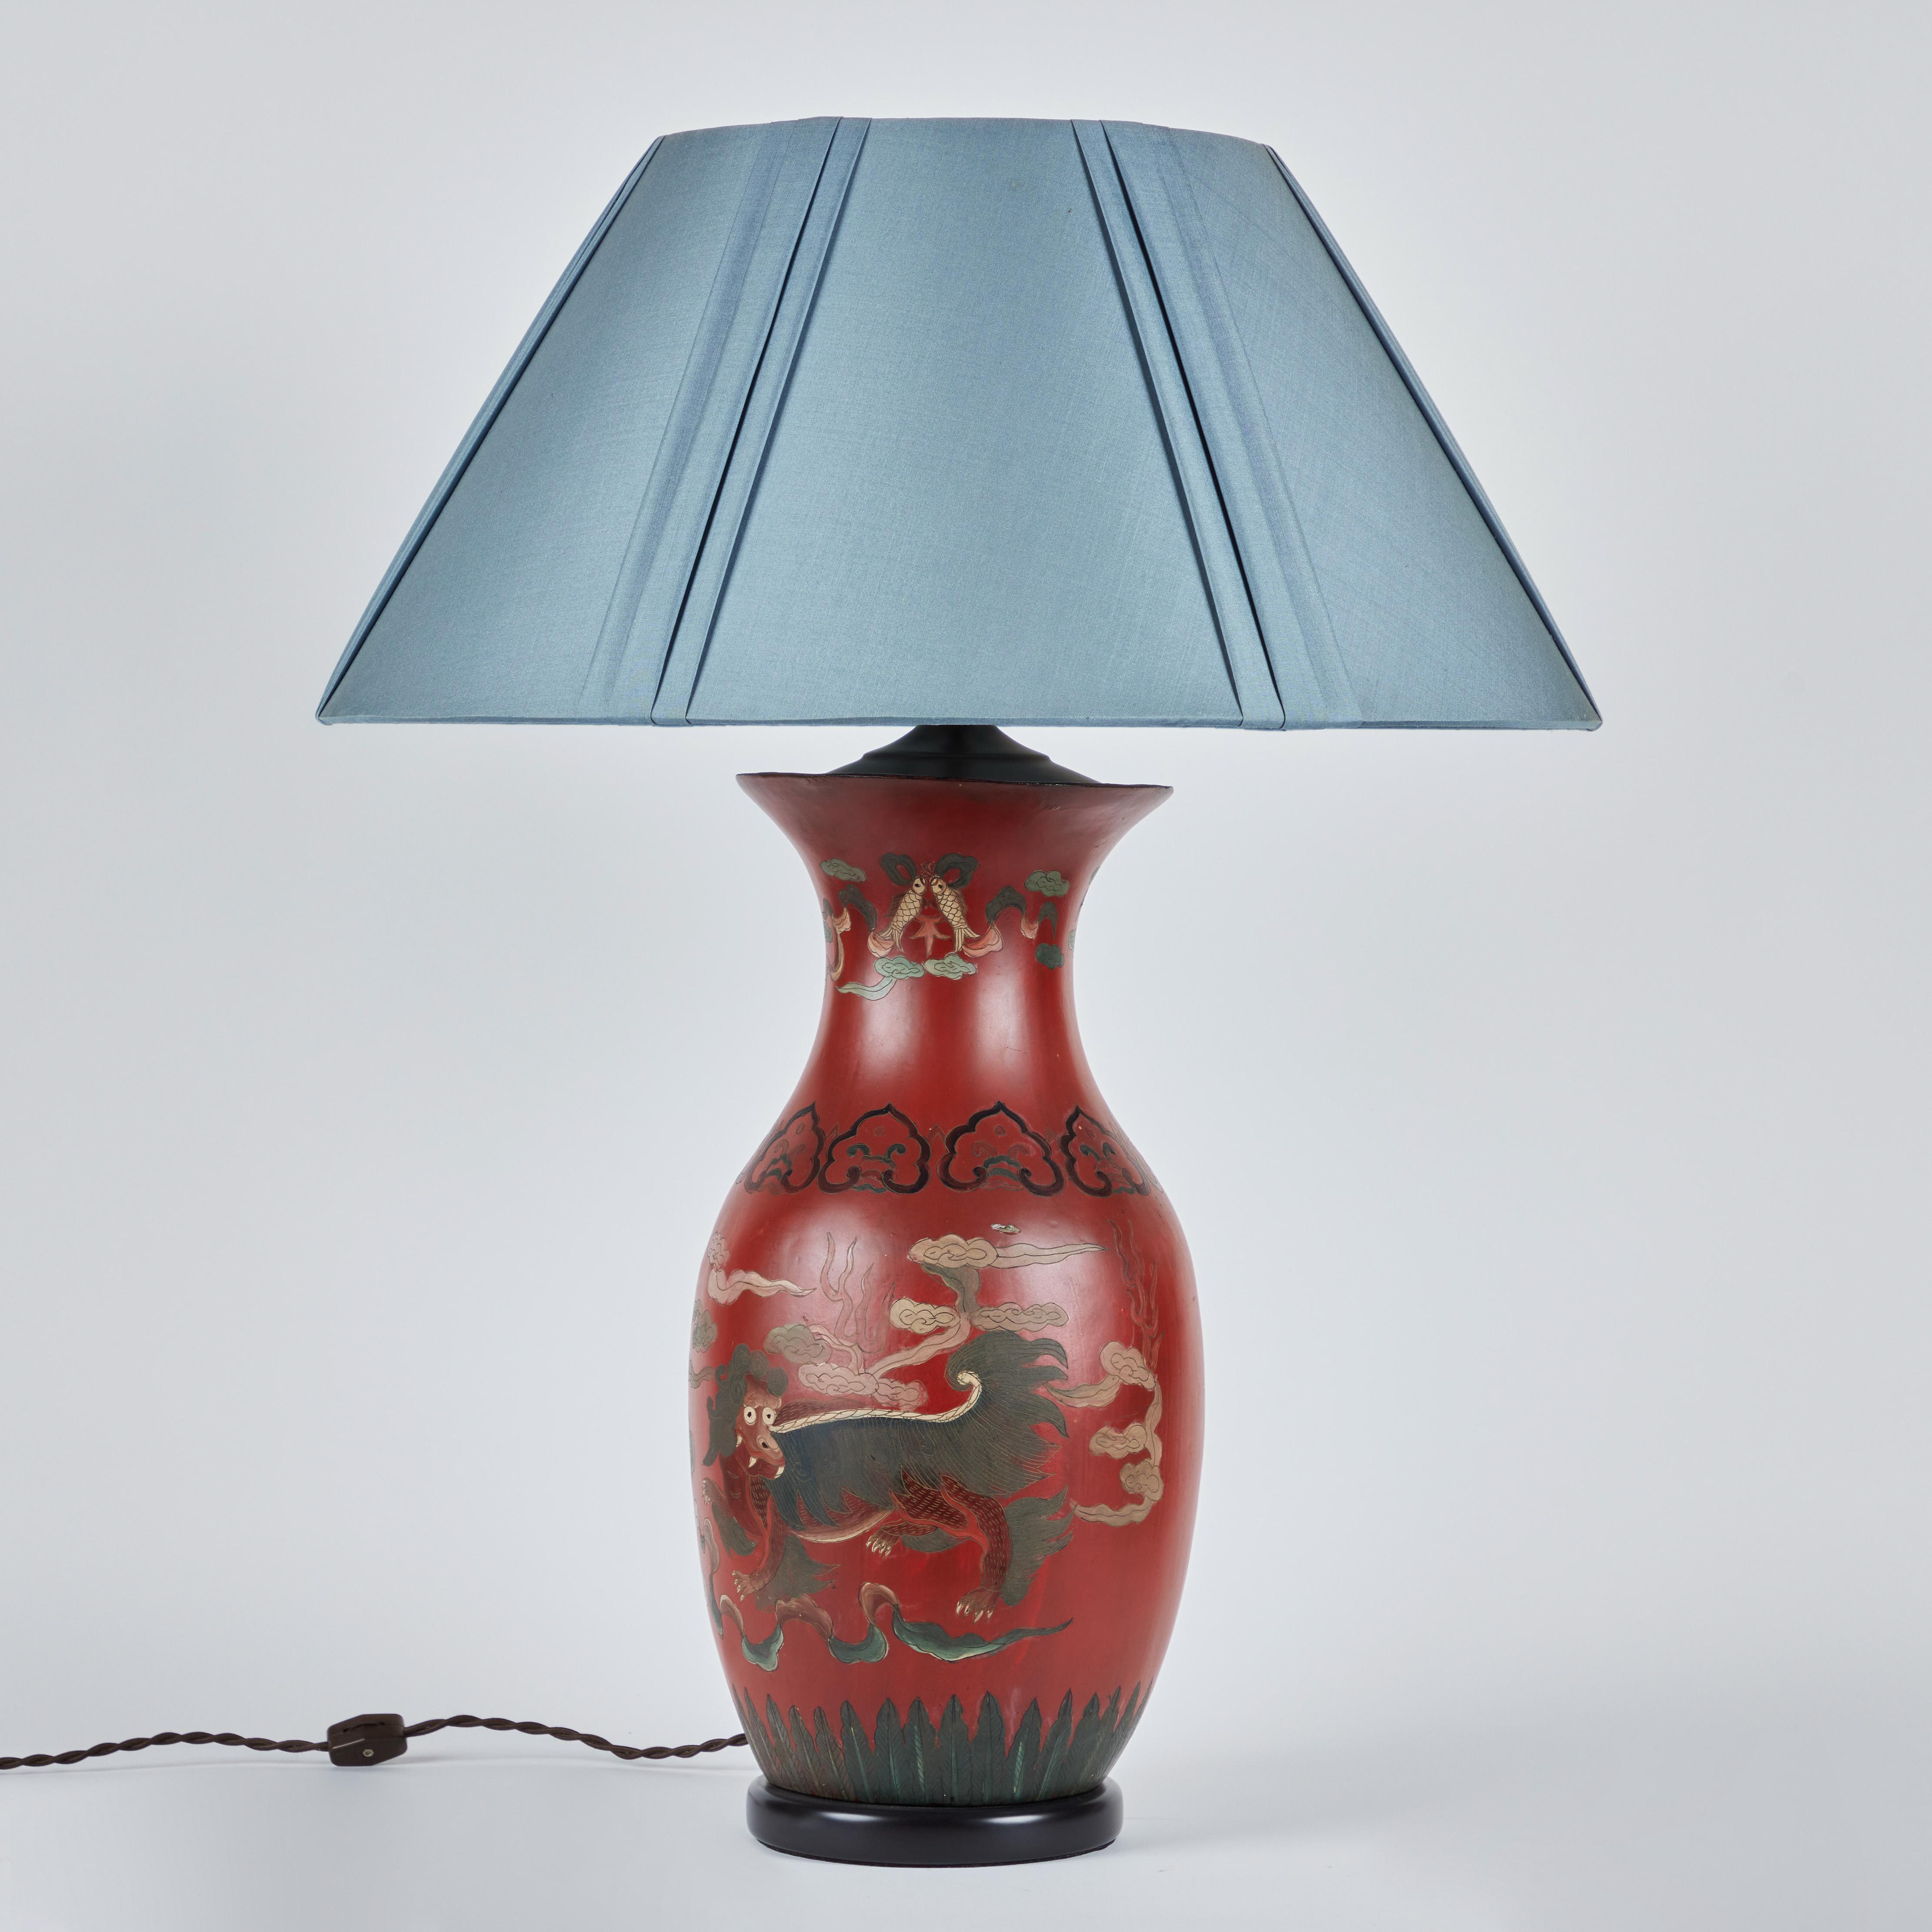 A pair of hand painted Chinese papier-mâché lamps on ebonized wooden bases. Stylized dragons and koi fish are the featured decoration. New custom silk lampshades are 21